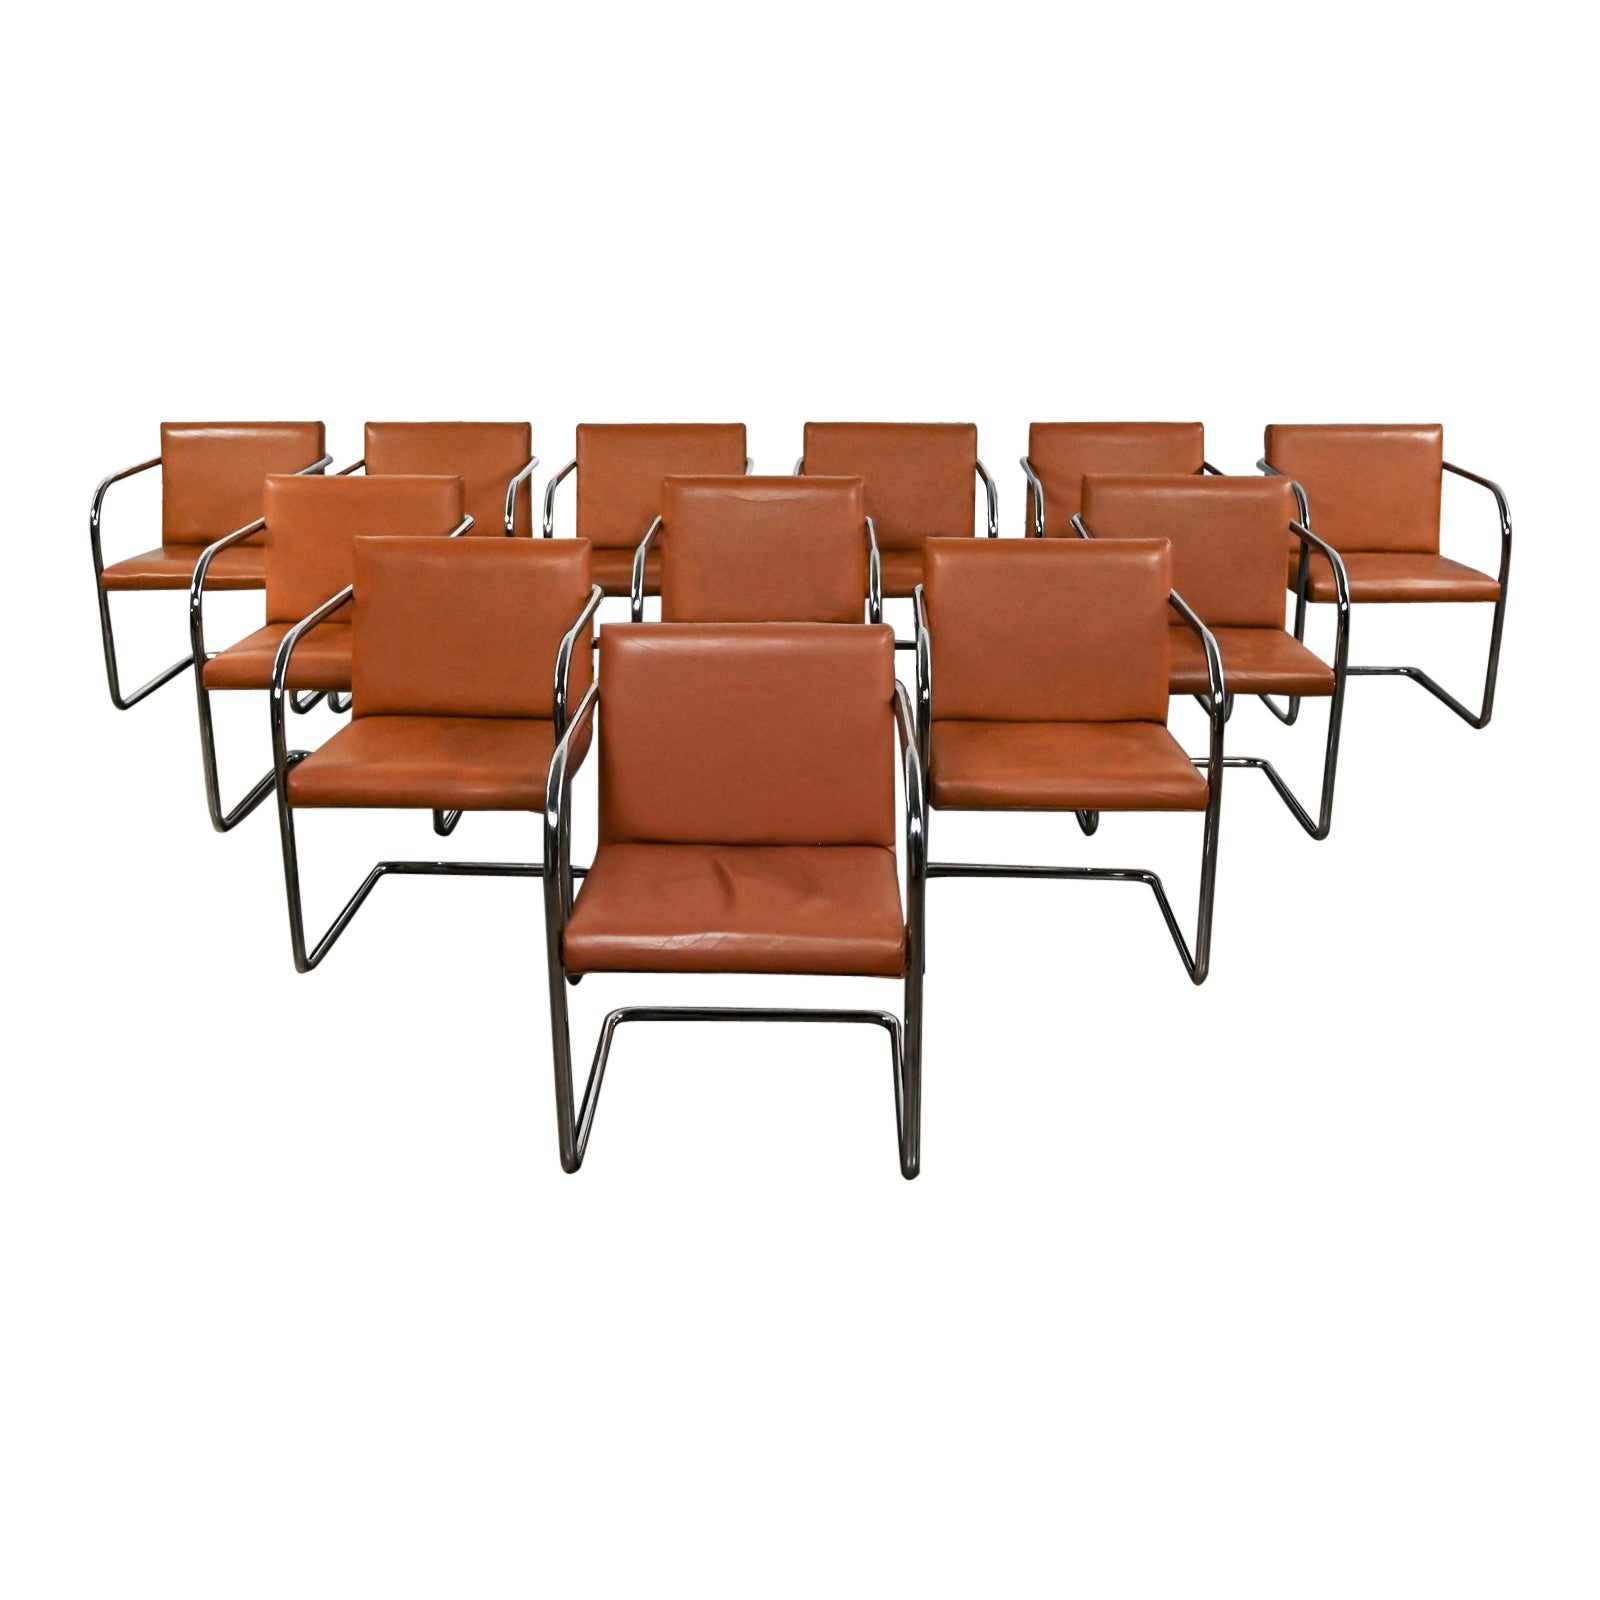 Thonet Bauhaus Brno Style Chairs Chrome & Cognac Leather Cantilever Set of 12  For Sale